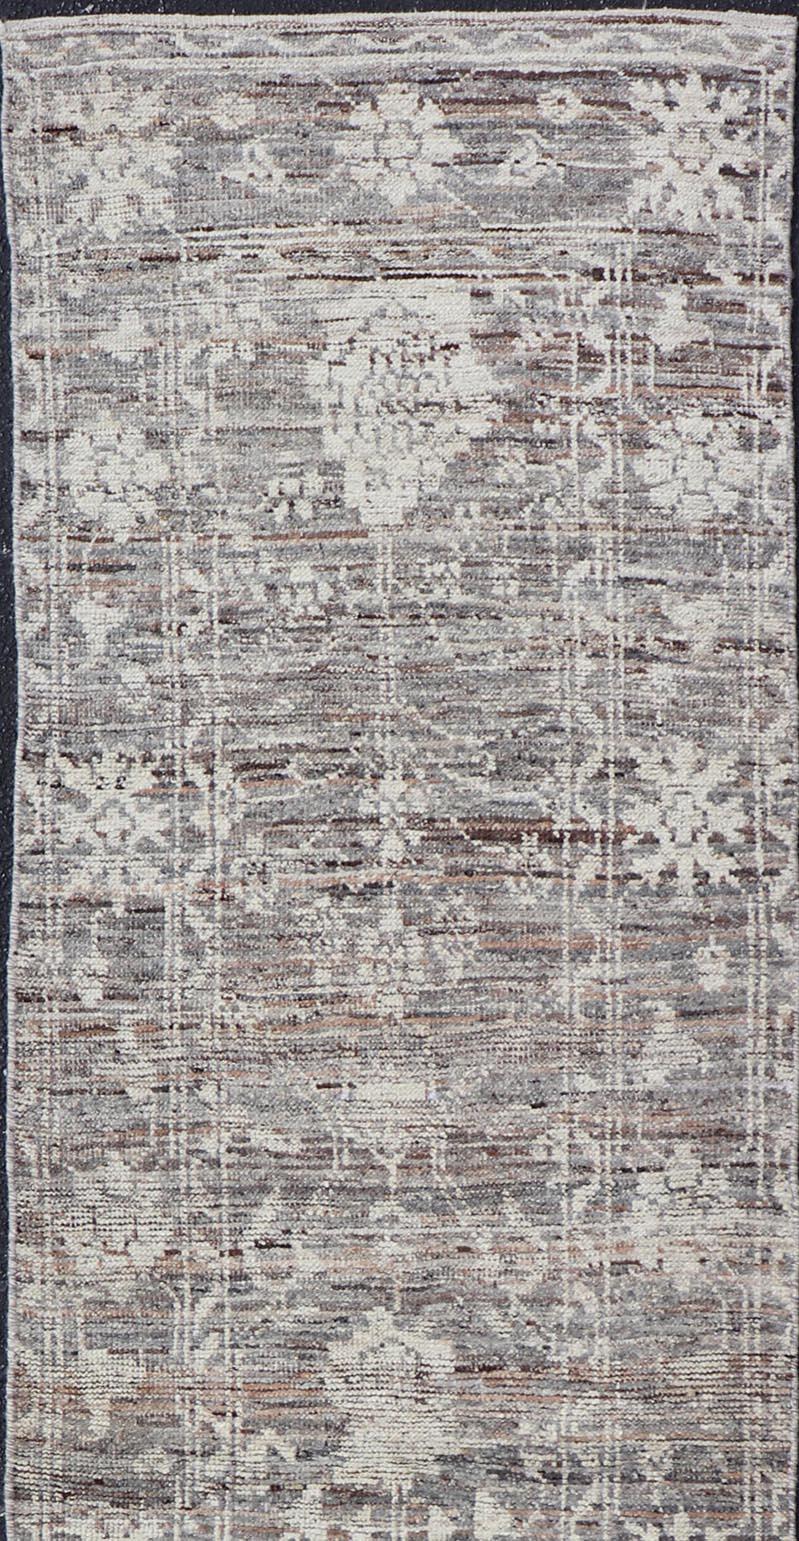 Modern Oushak Runner in Wool with Floral Design in Shades of Gray, Brown, Cream For Sale 3